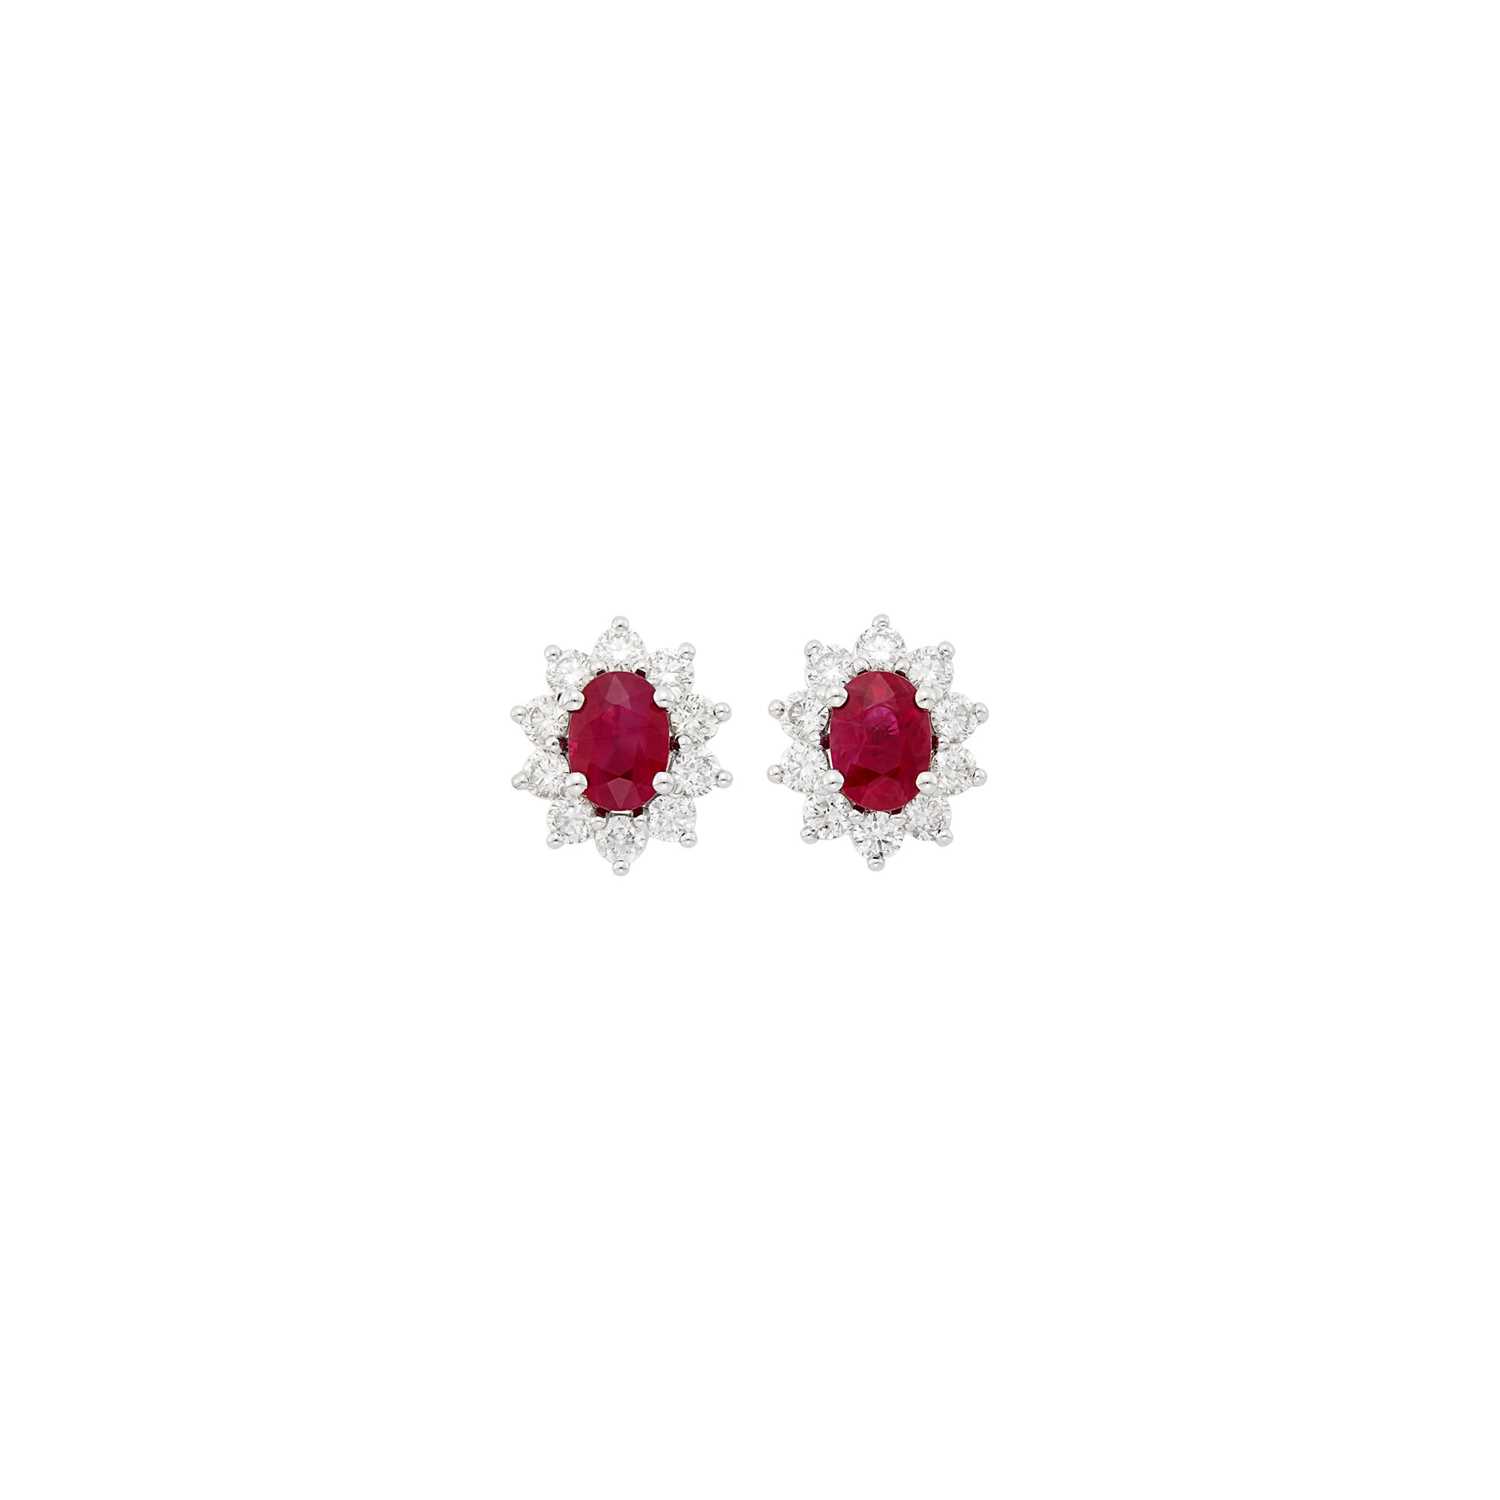 Lot 104 - Pair of White Gold, Ruby and Diamond Earrings